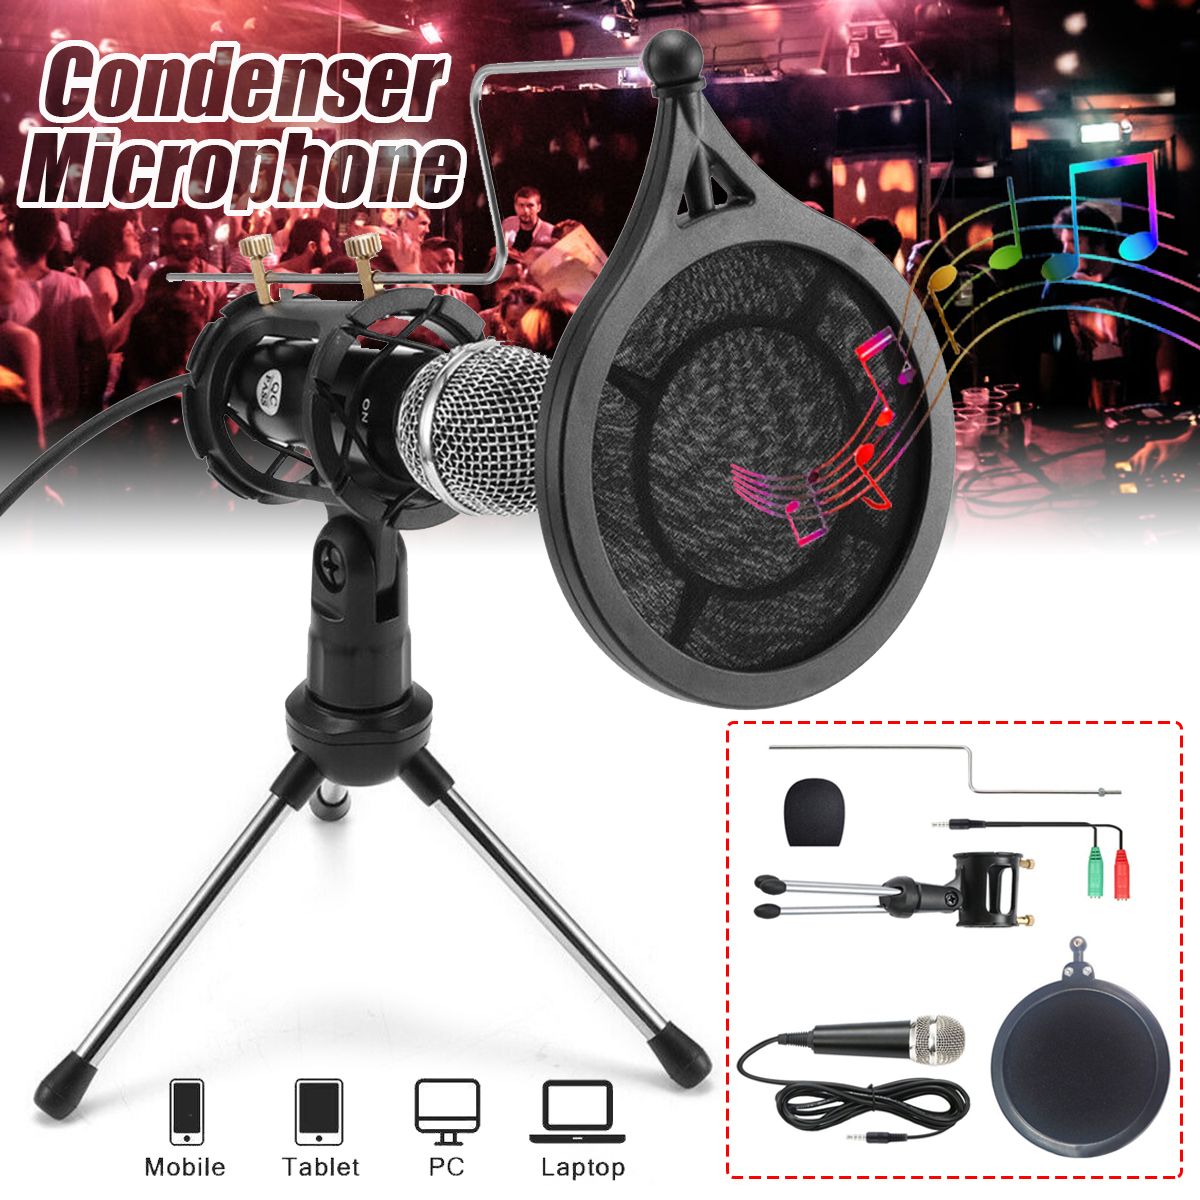 Bakeey-Studio-Condenser-Microphone-Set-Recording-Broadcasting-Mic-With-Stand-For-PC-Phone-Karaoke-1734067